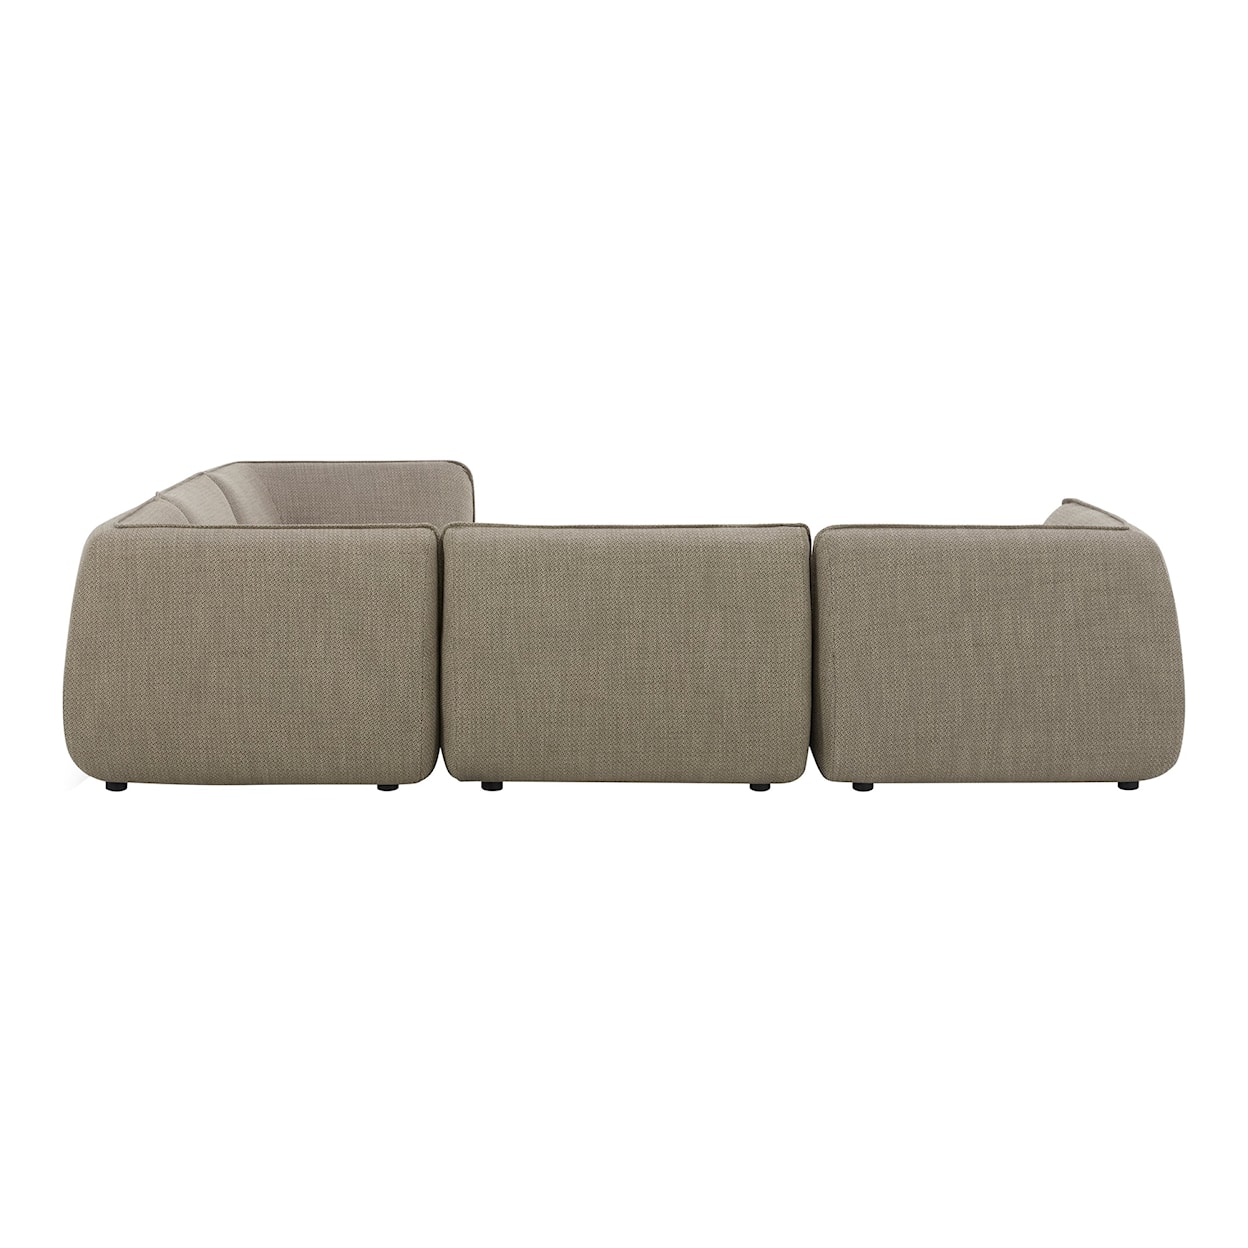 Moe's Home Collection Zeppelin 5-Piece Speckled Pumice Modular Sectional 